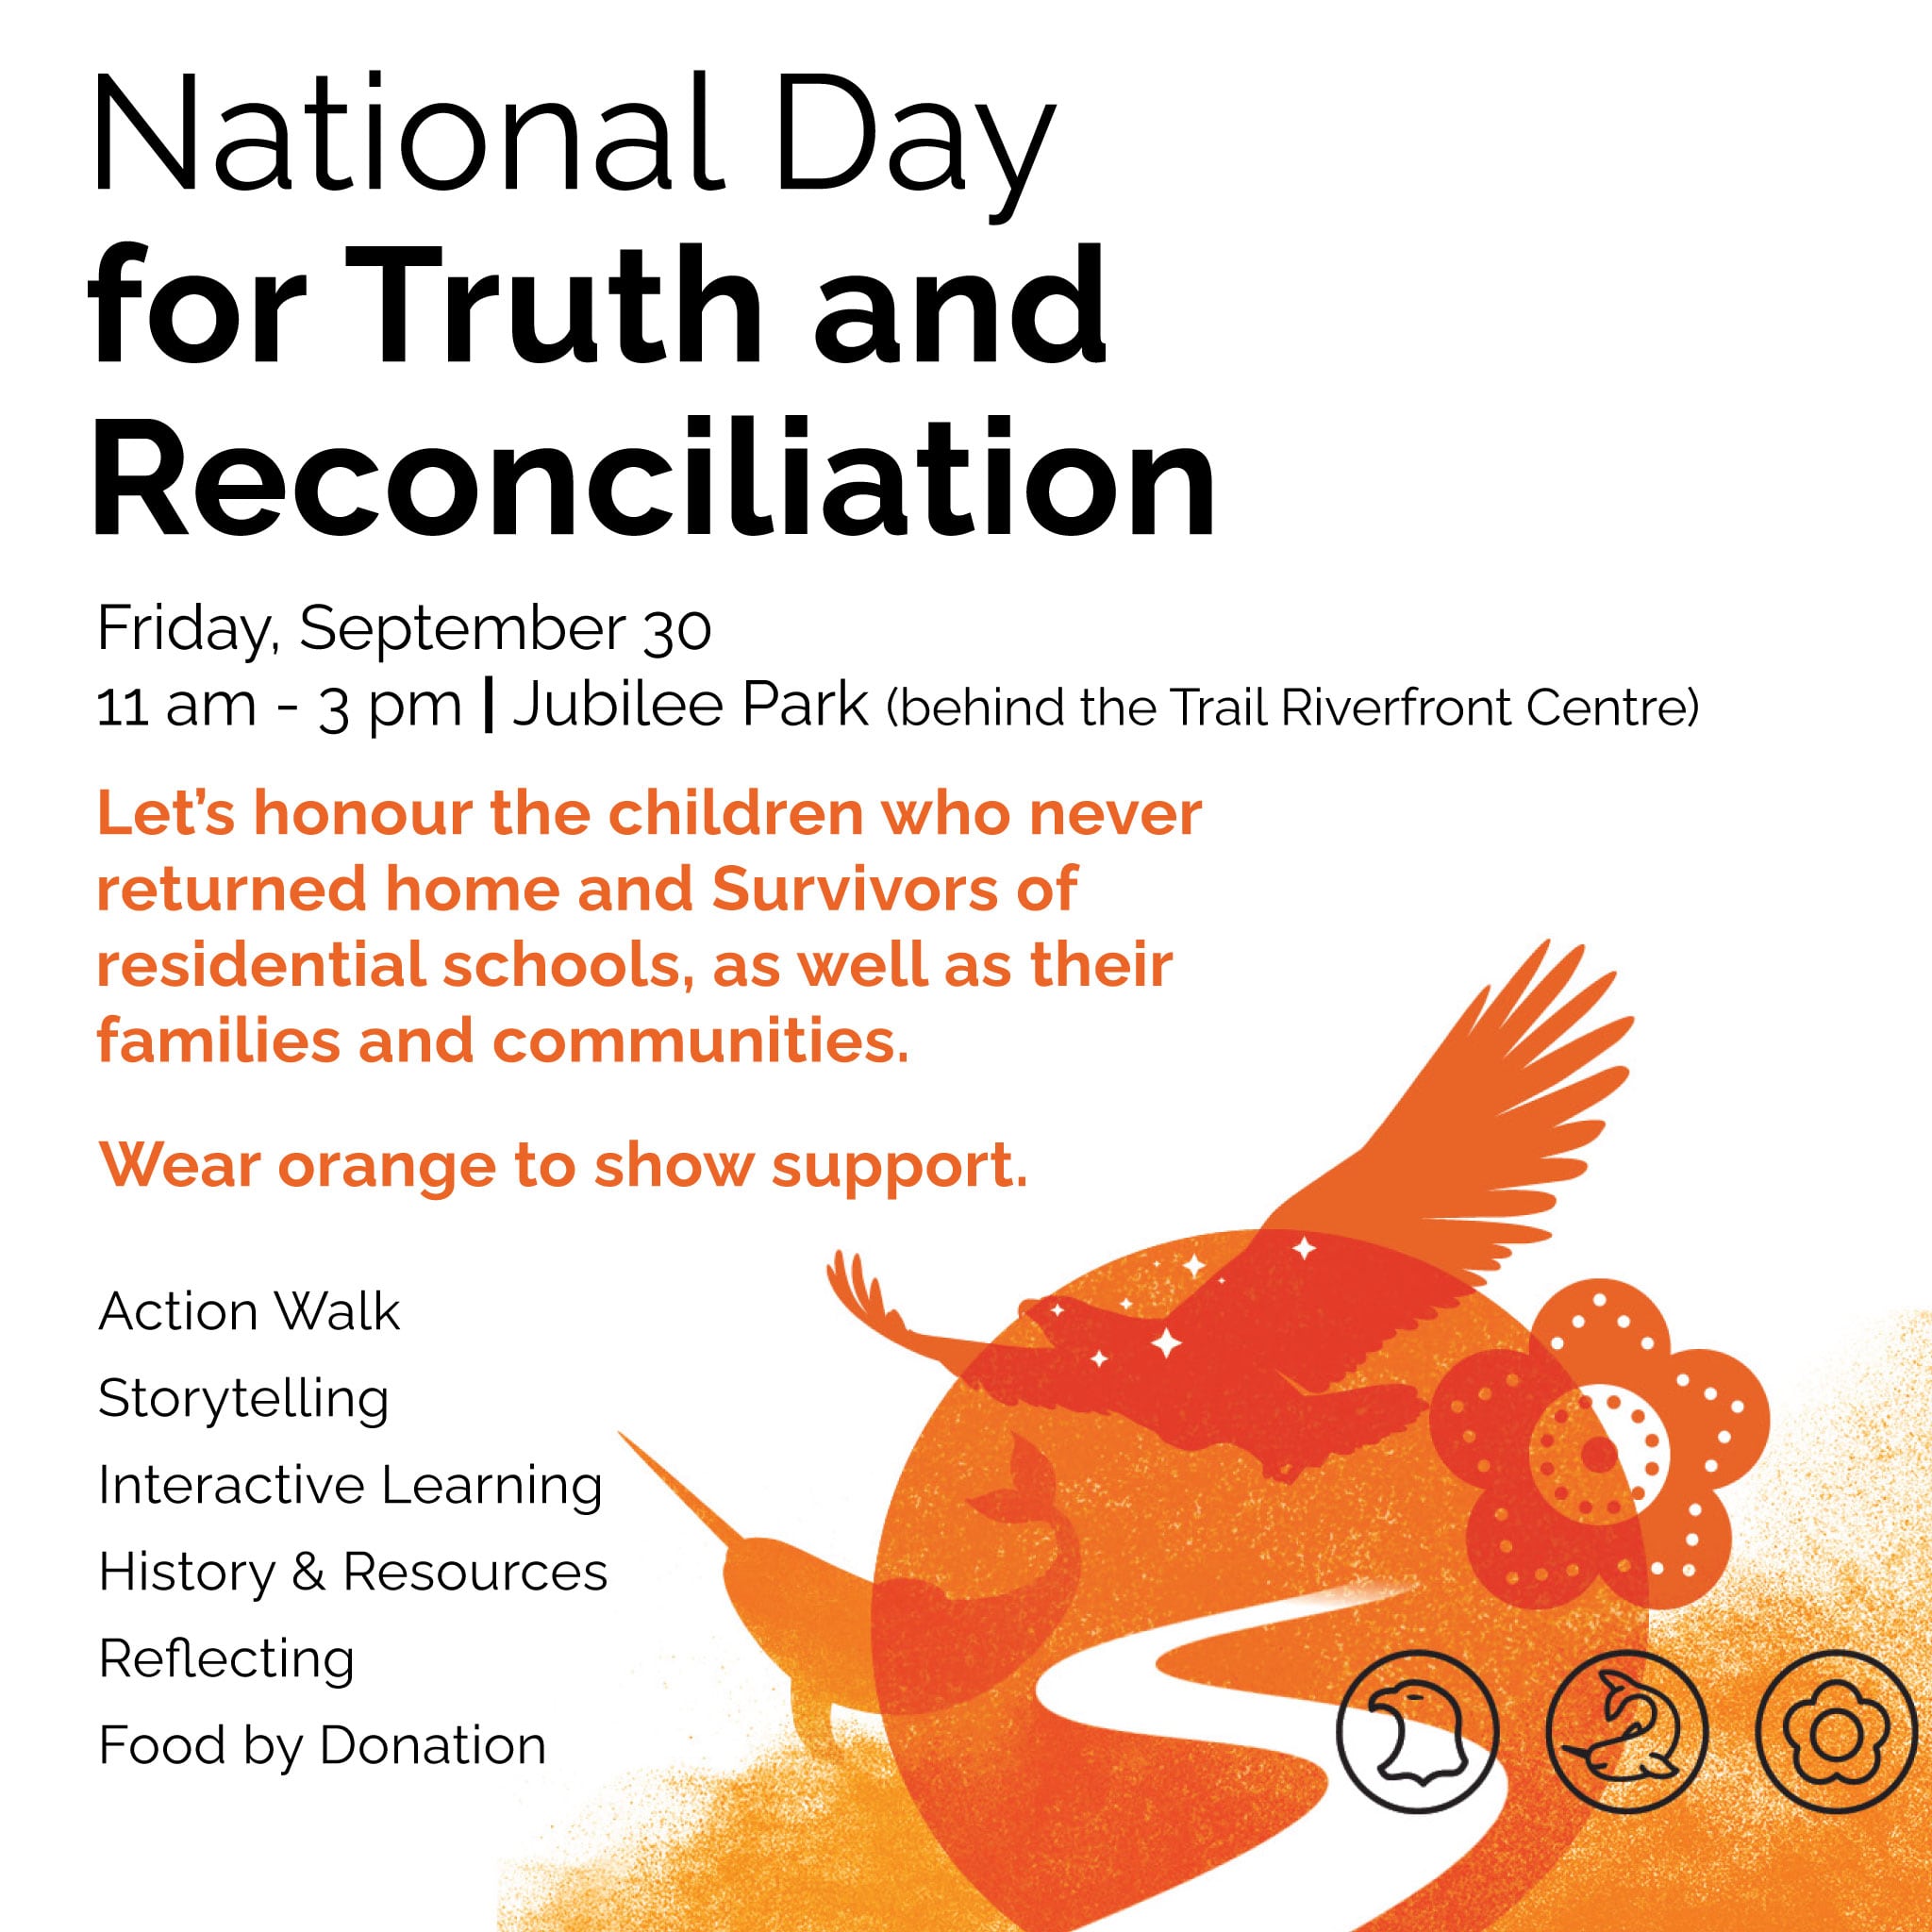 National Day for Truth and Reconciliation – Join us on September 30